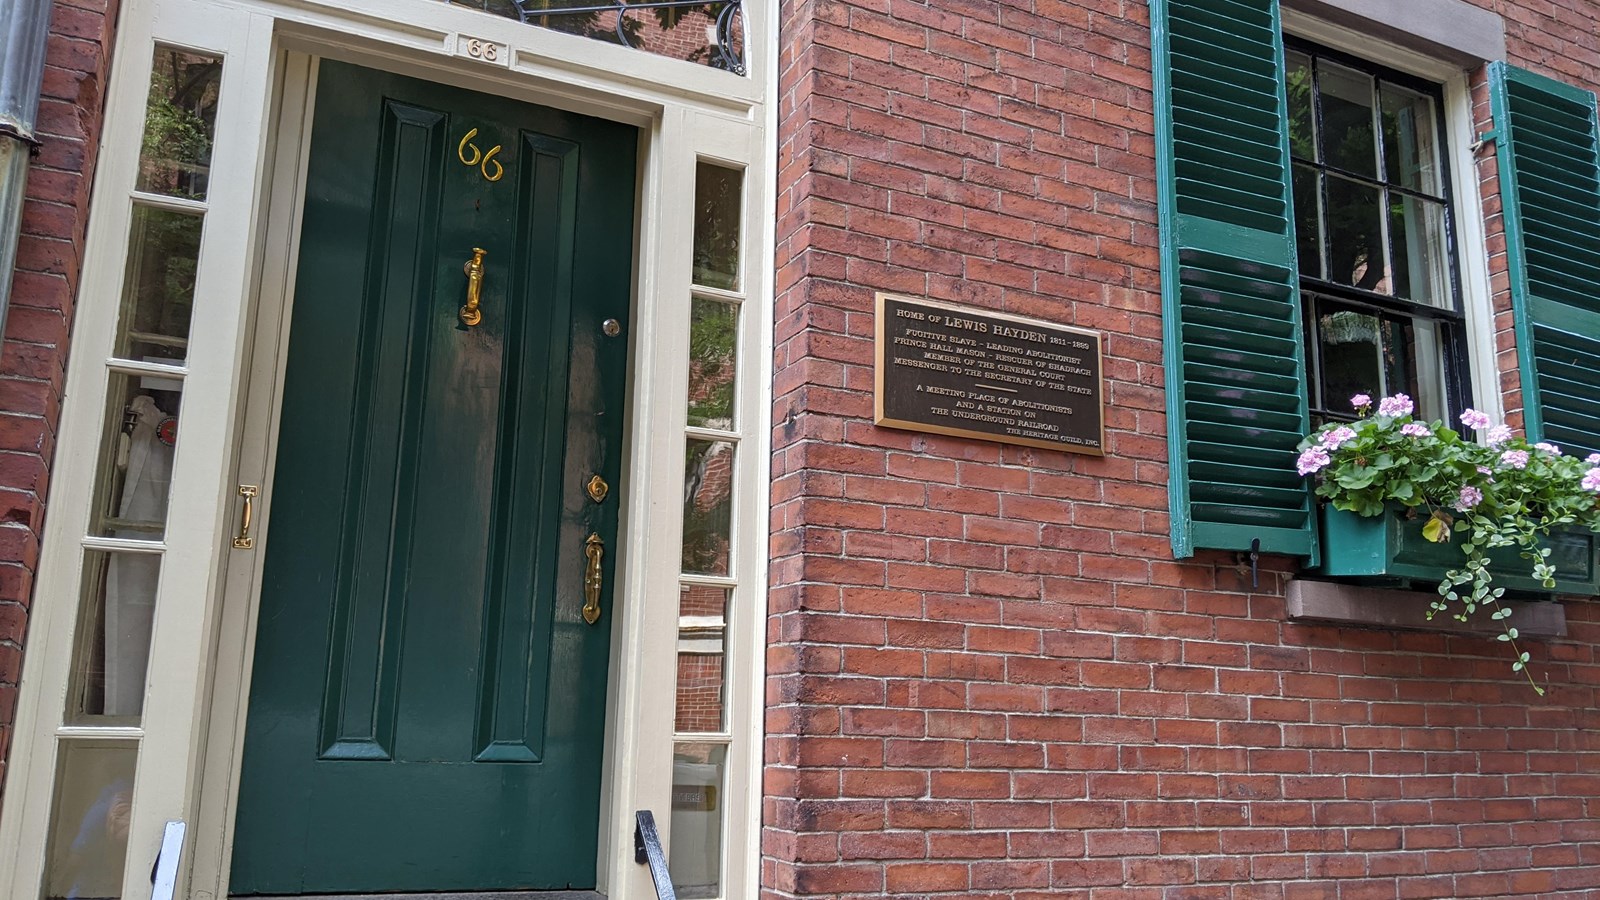 Green door and window with green shutters flank a bronze plaque on a brick wall.